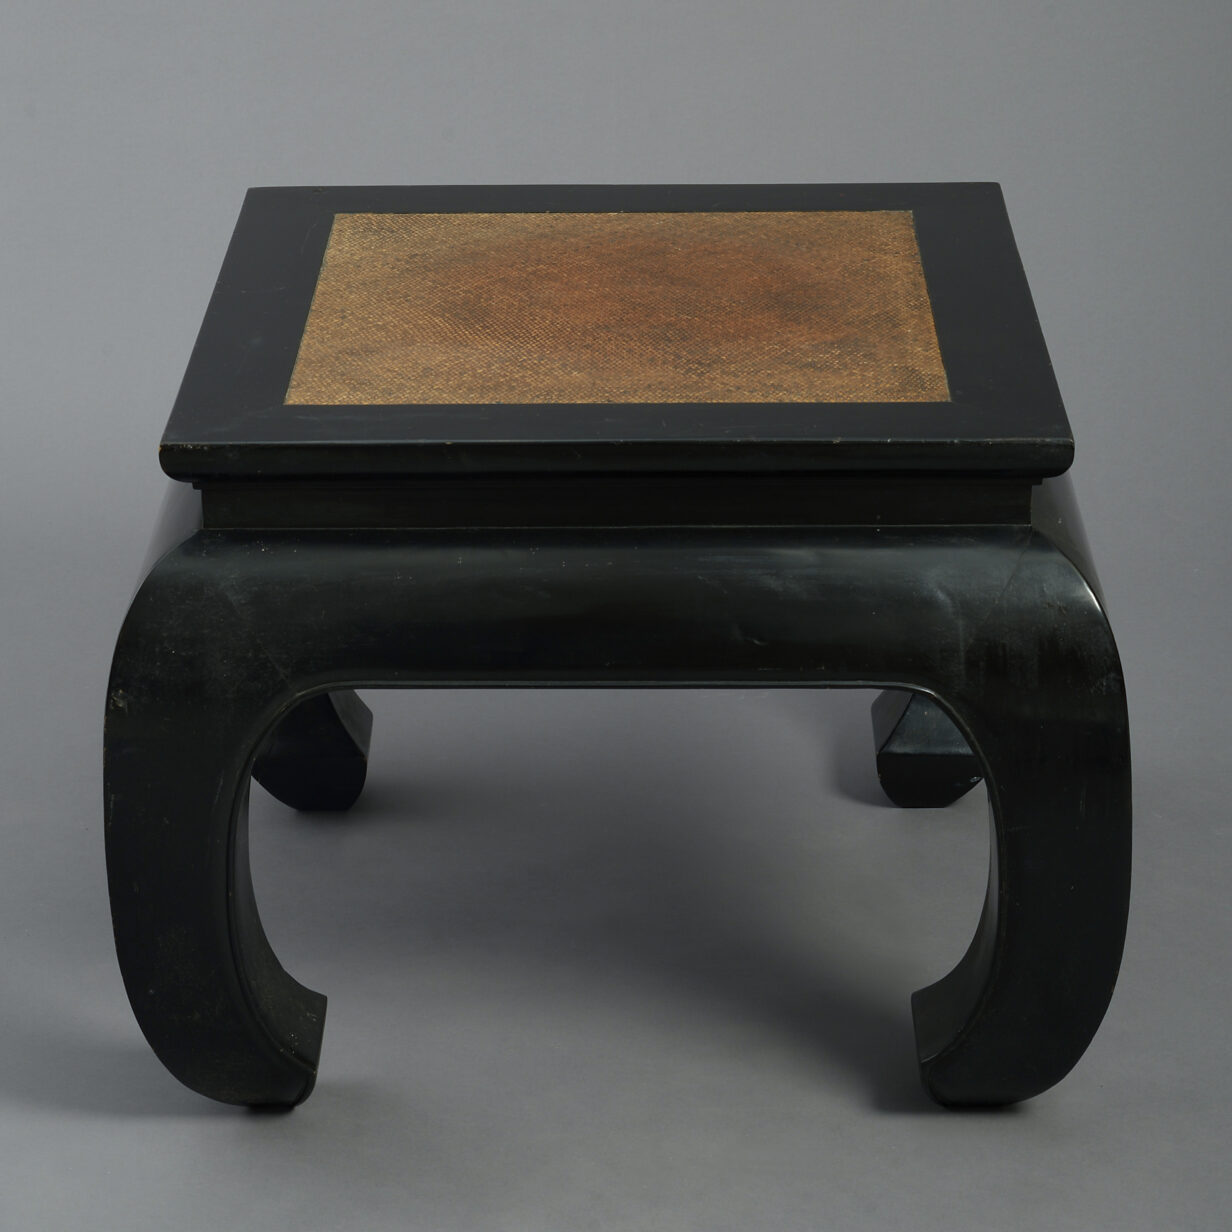 Square lacquer low table